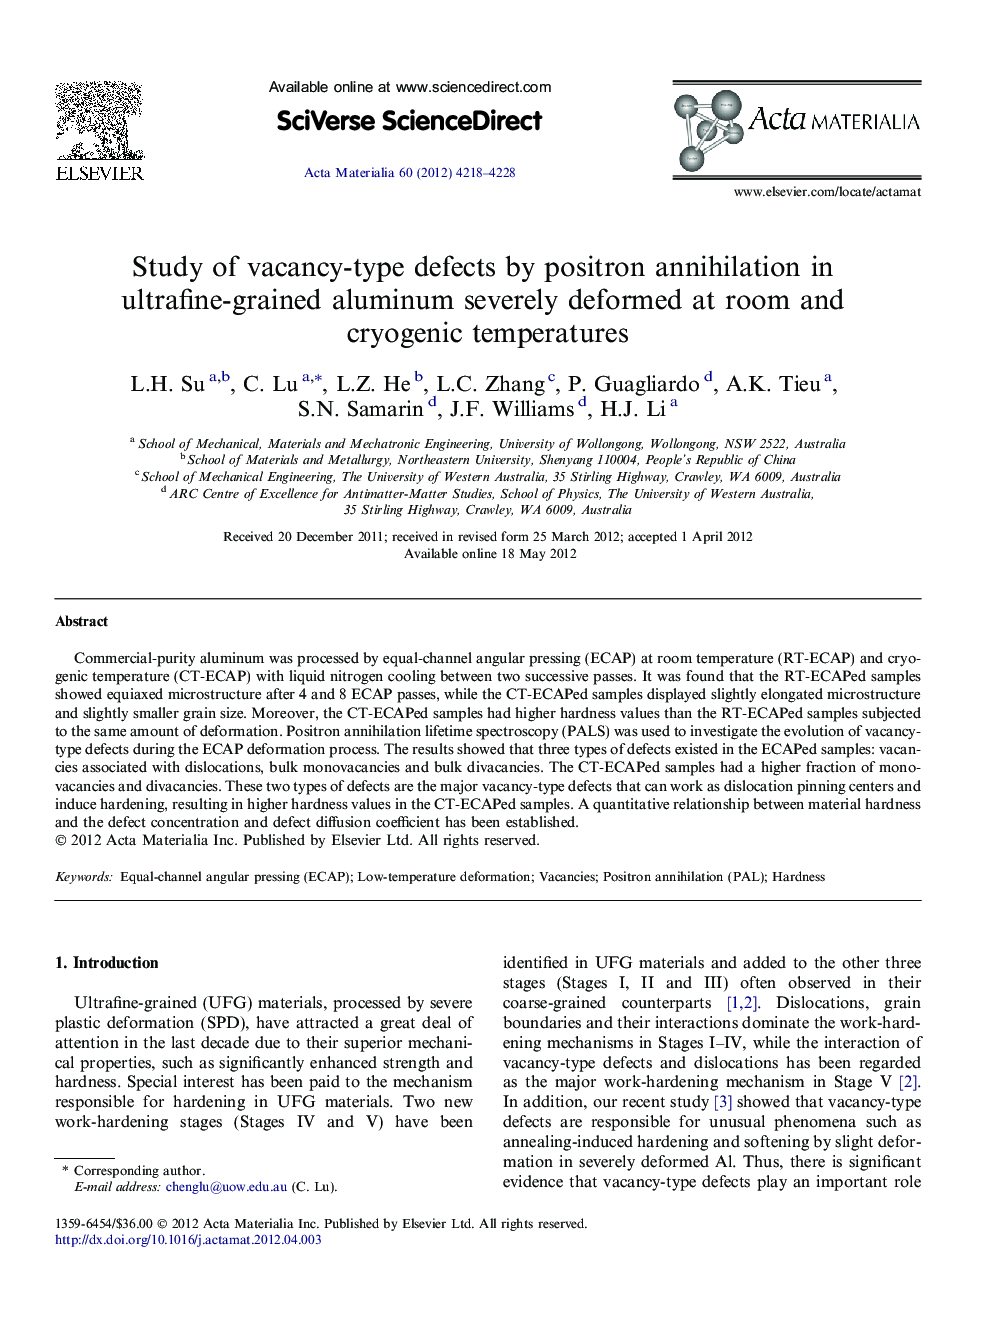 Study of vacancy-type defects by positron annihilation in ultrafine-grained aluminum severely deformed at room and cryogenic temperatures